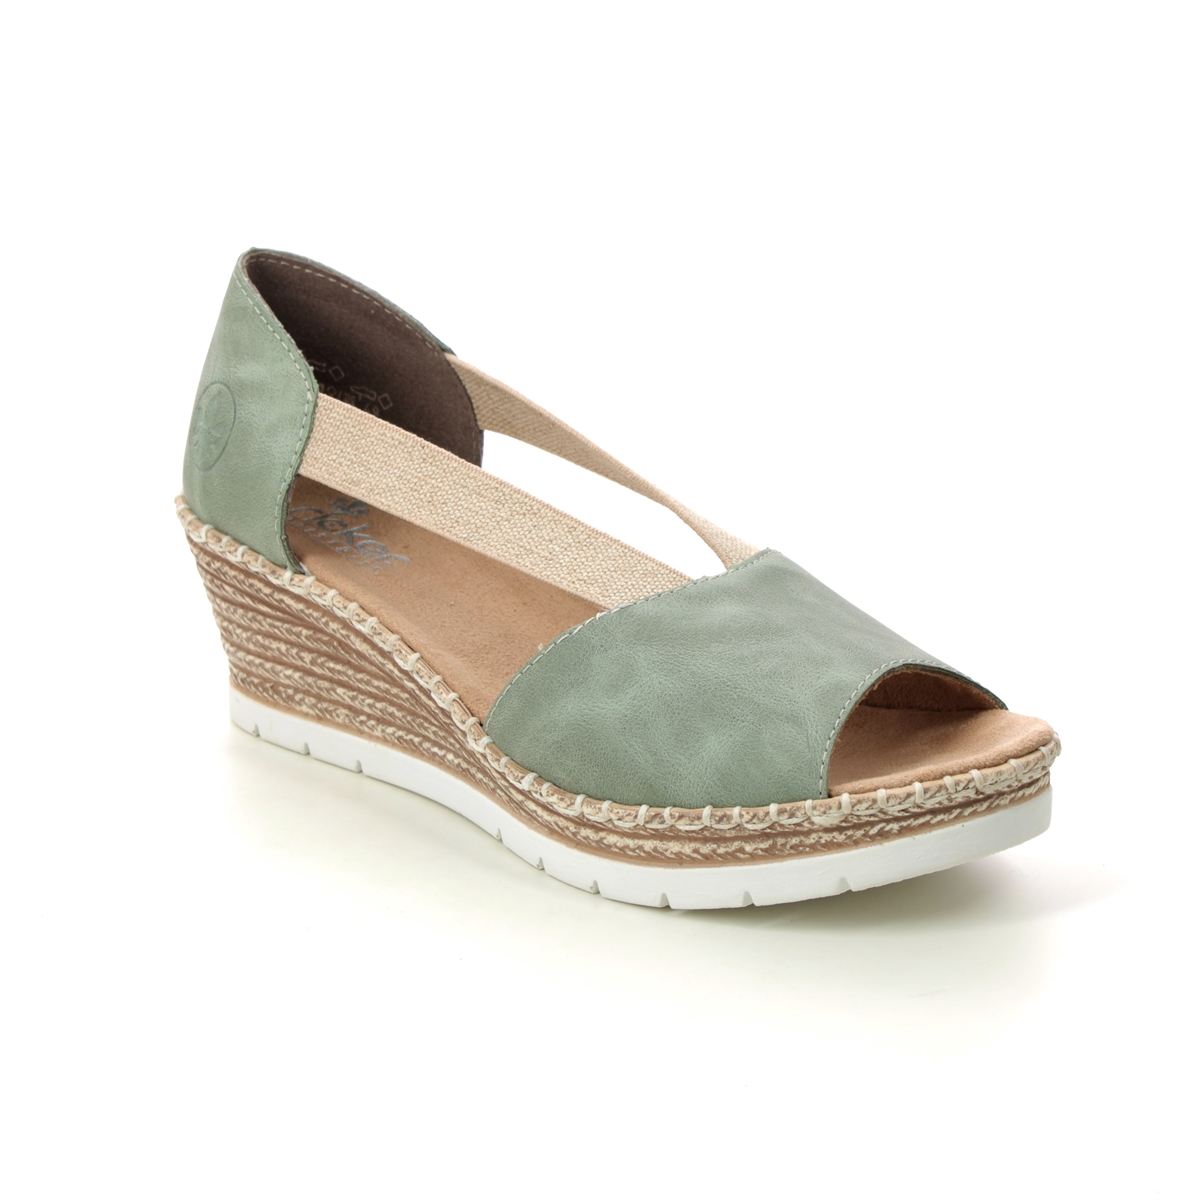 Rieker 619X1-52 Mint green Womens Wedge Sandals in a Plain Man-made in Size 41